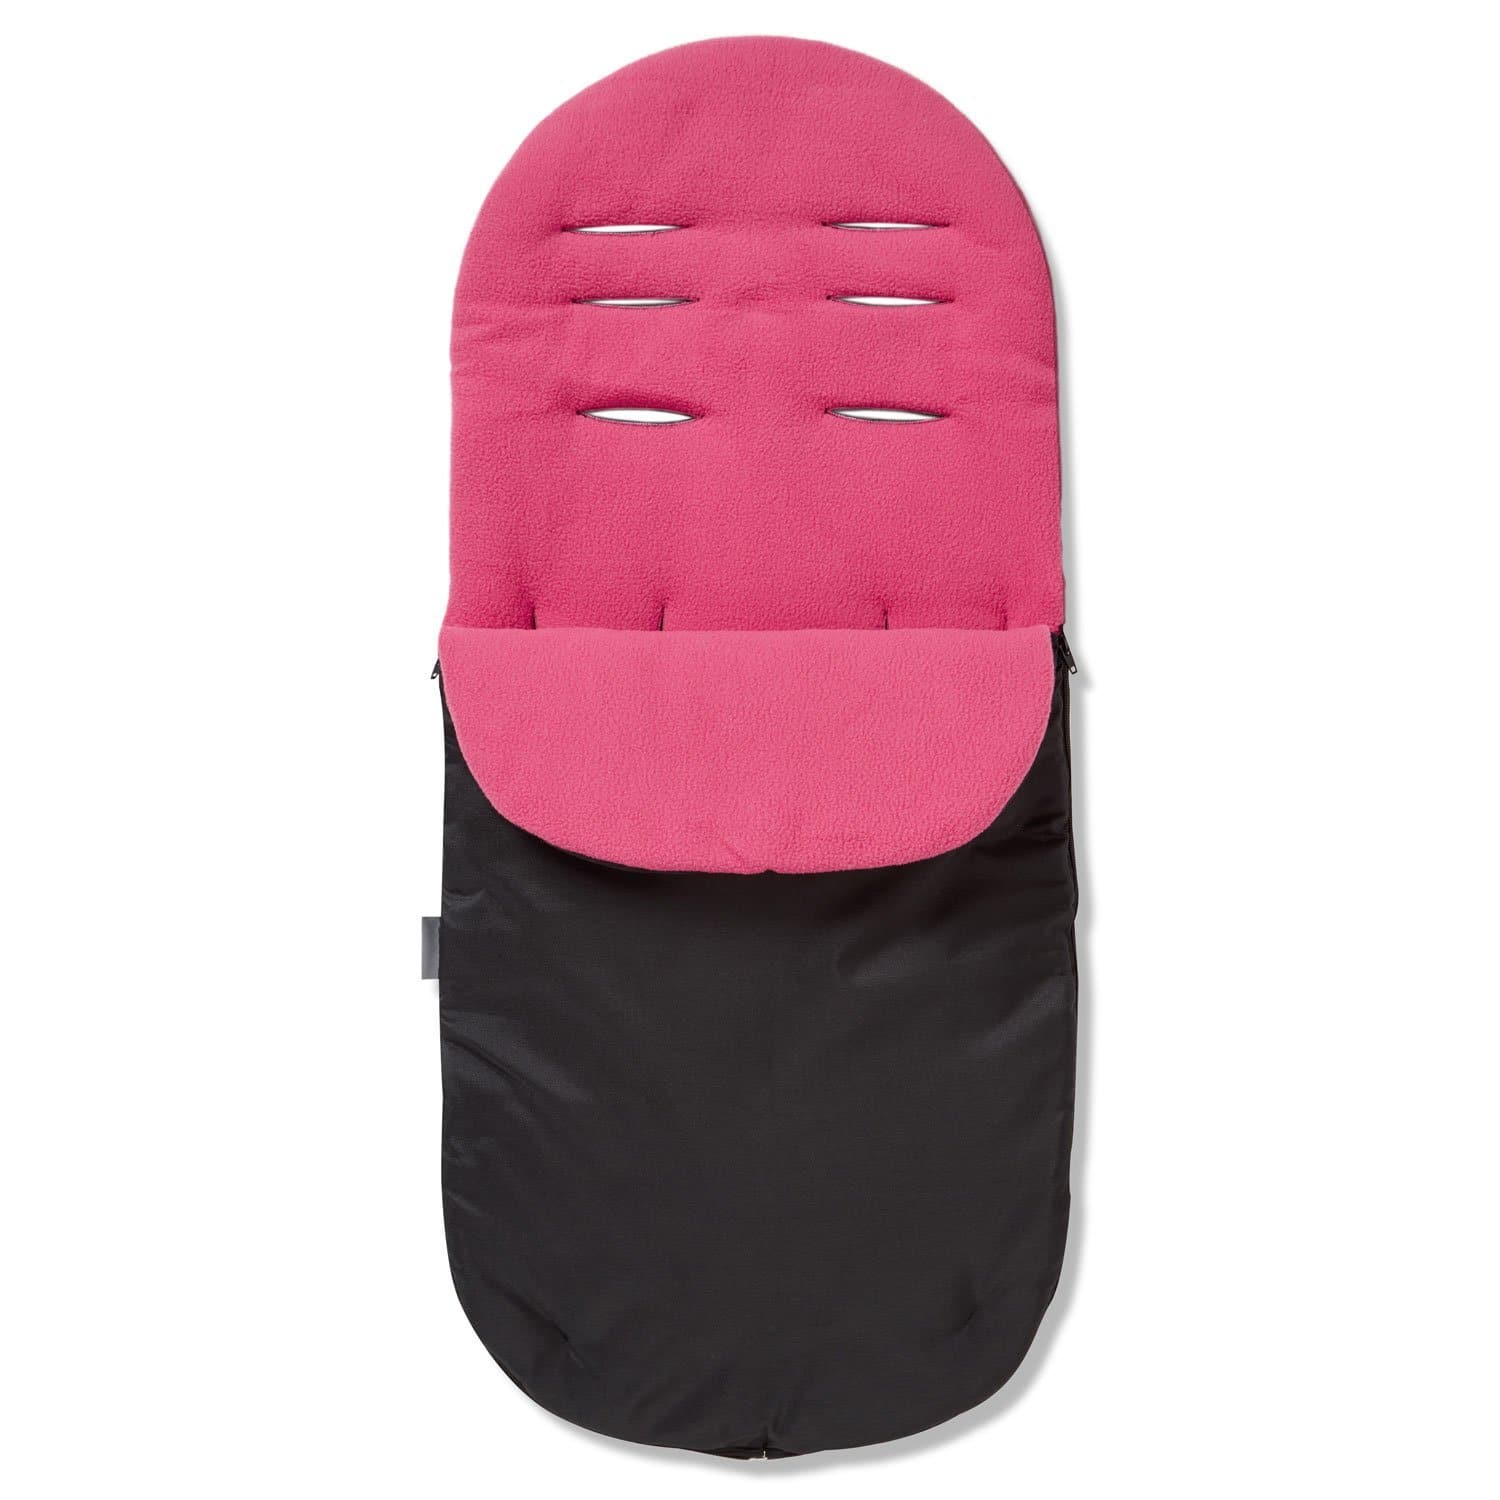 Footmuff / Cosy Toes Compatible with Peg Perego - Dark Pink / Fits All Models | For Your Little One